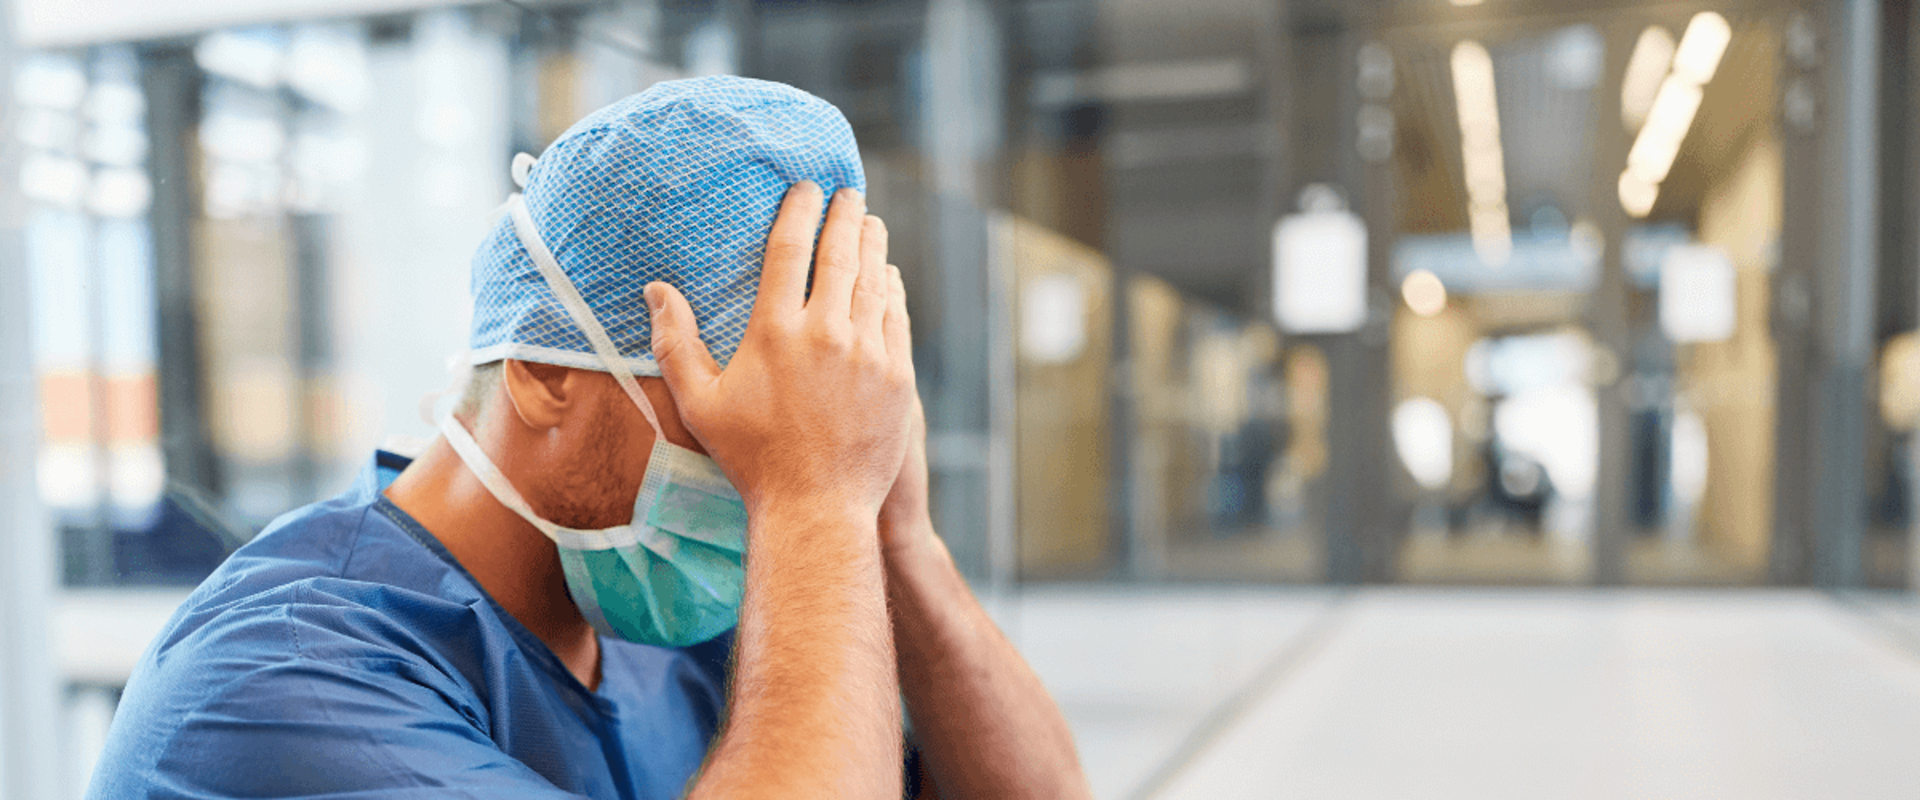 What kinds of mistakes can amount to medical malpractice?